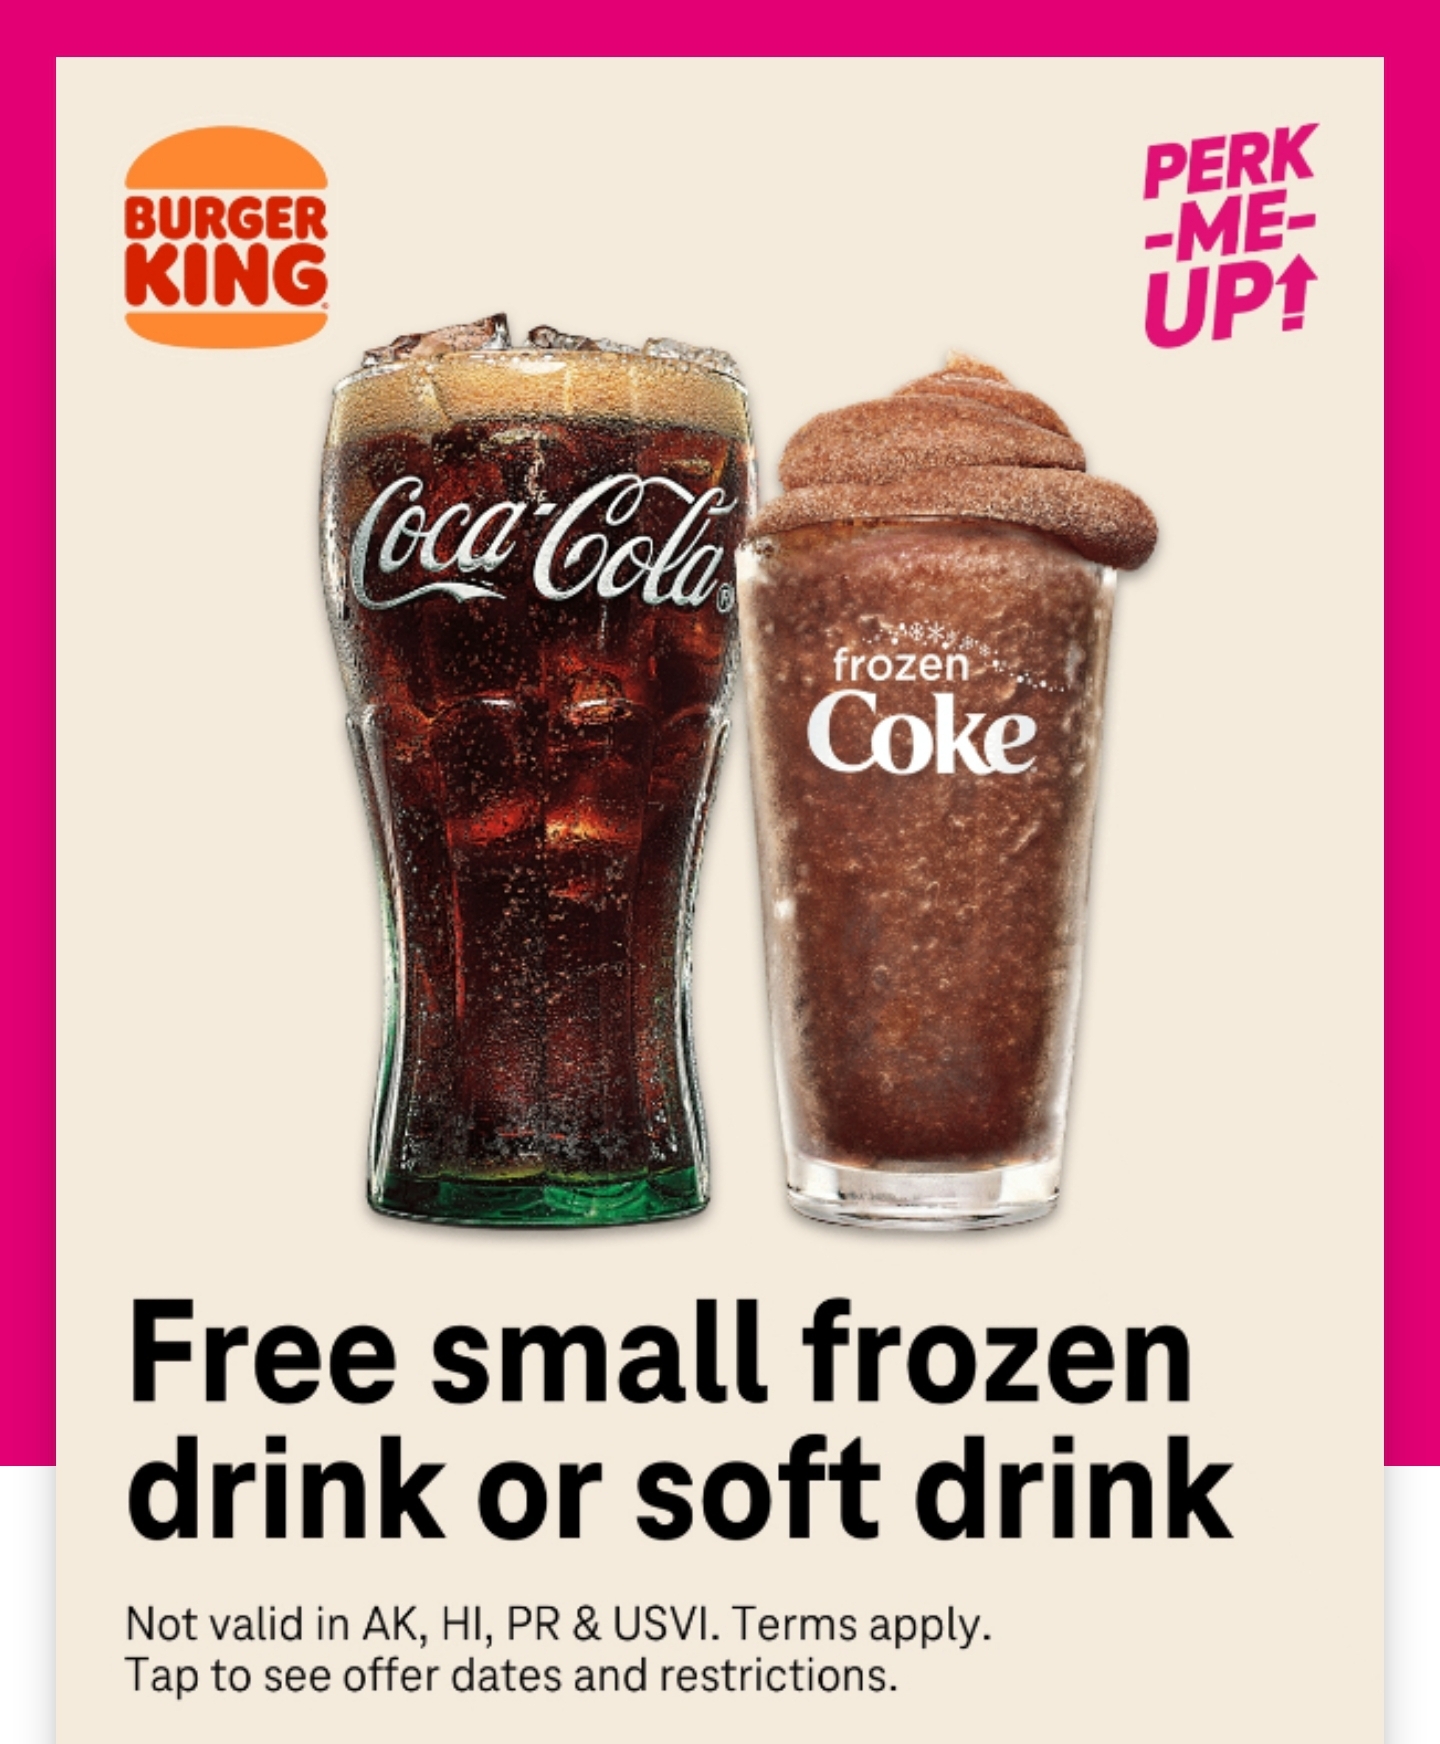 Free Small Frozen Drink or Soft Drink at Burger King